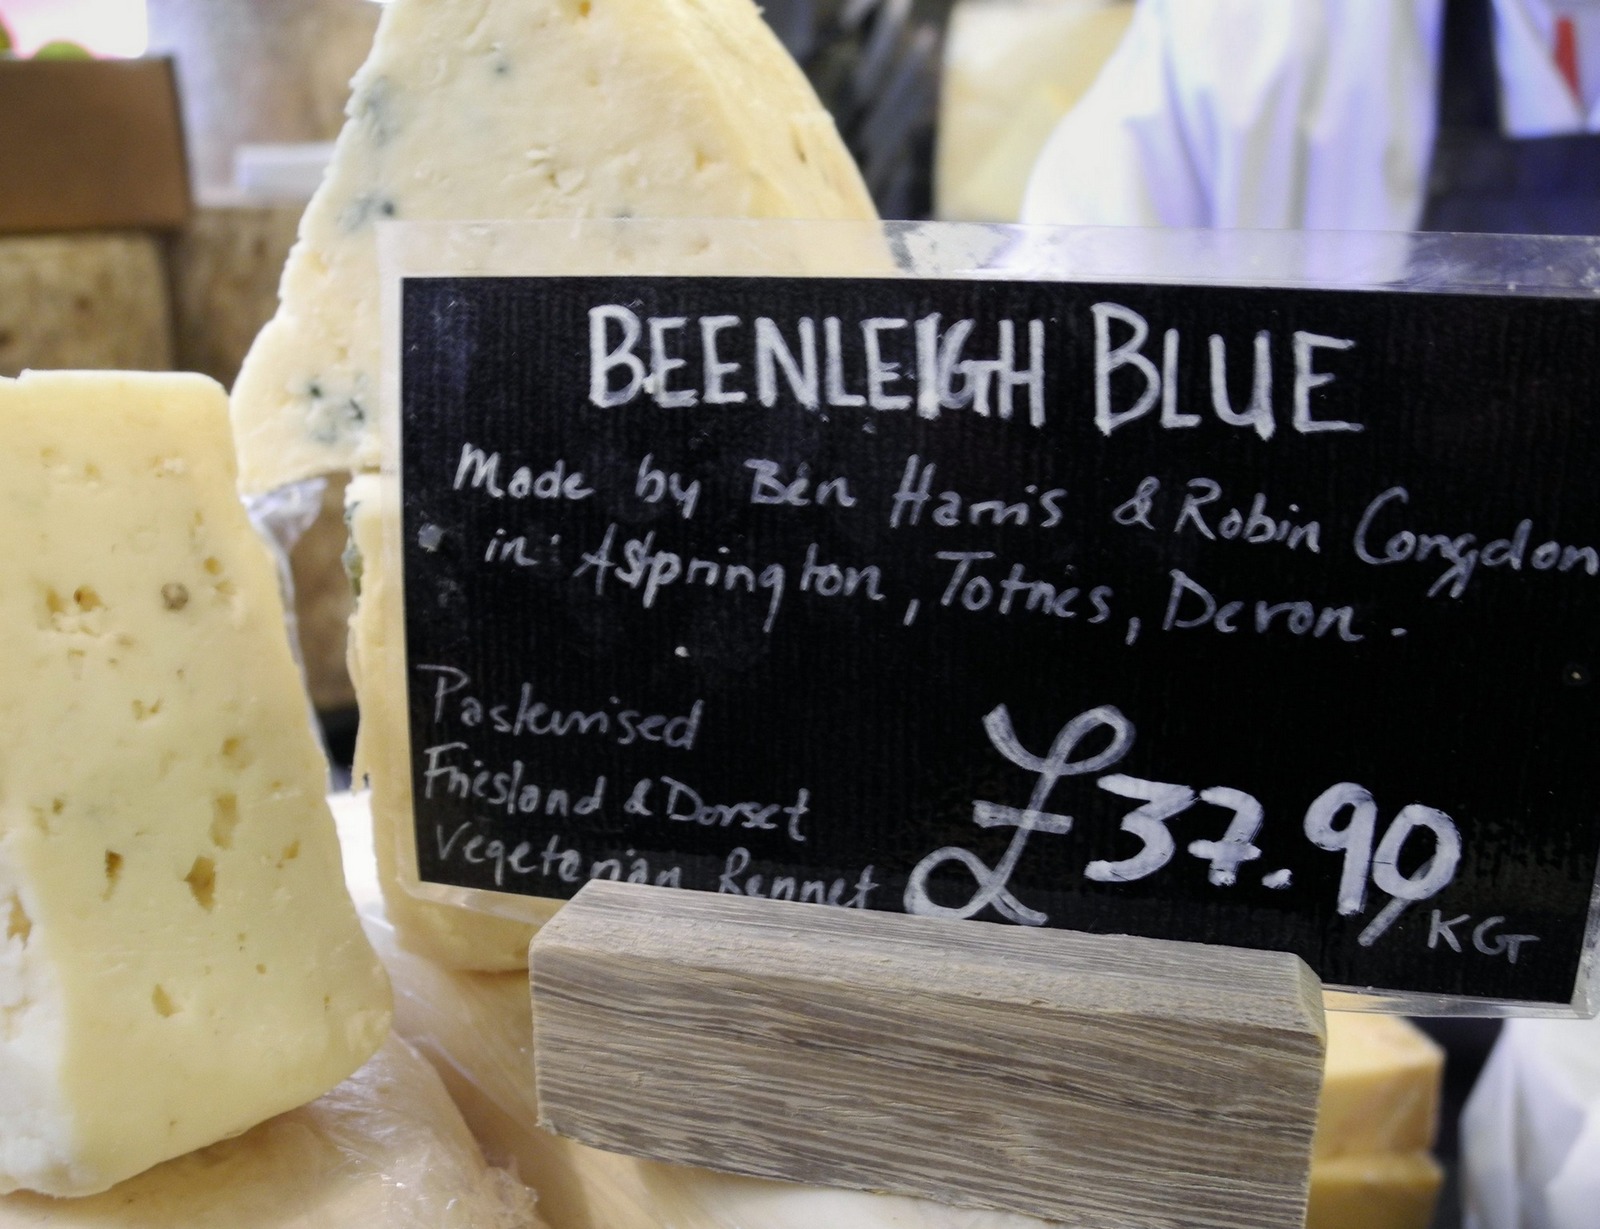 Beenleigh Blue at Neal's Yard, For Pear & Duck Confit Salad